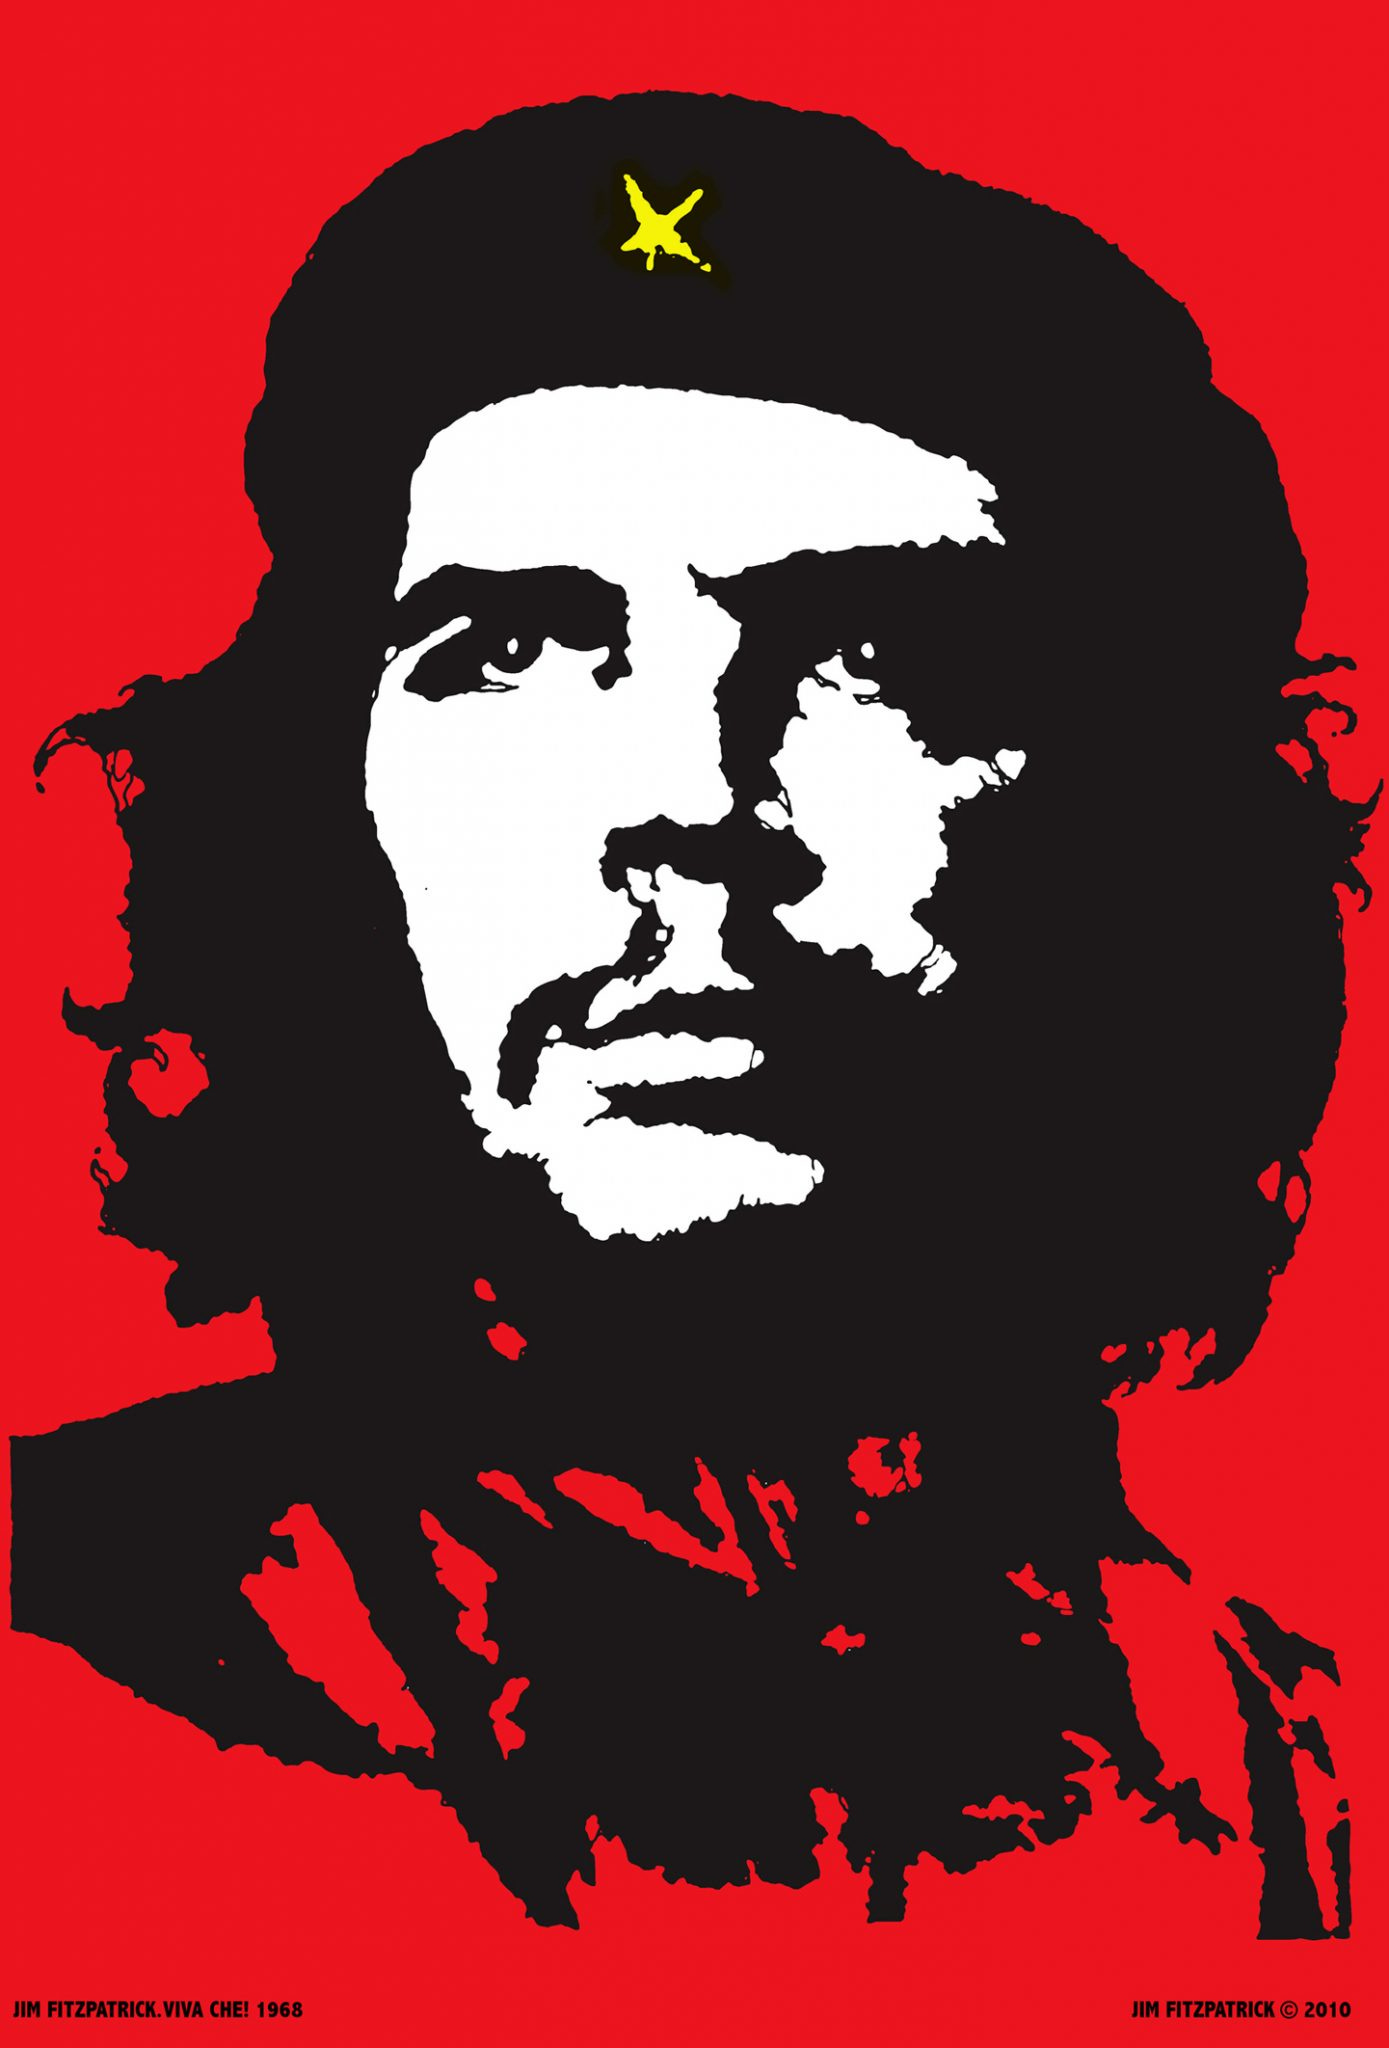 Che Guevara VIVA CHE 1968! The original red and black Che Guevara poster  reproduced exactly as in 1968 from the original artwork. All are signed and  numbered by Jim FitzPatrick. – Jim FitzPatrick